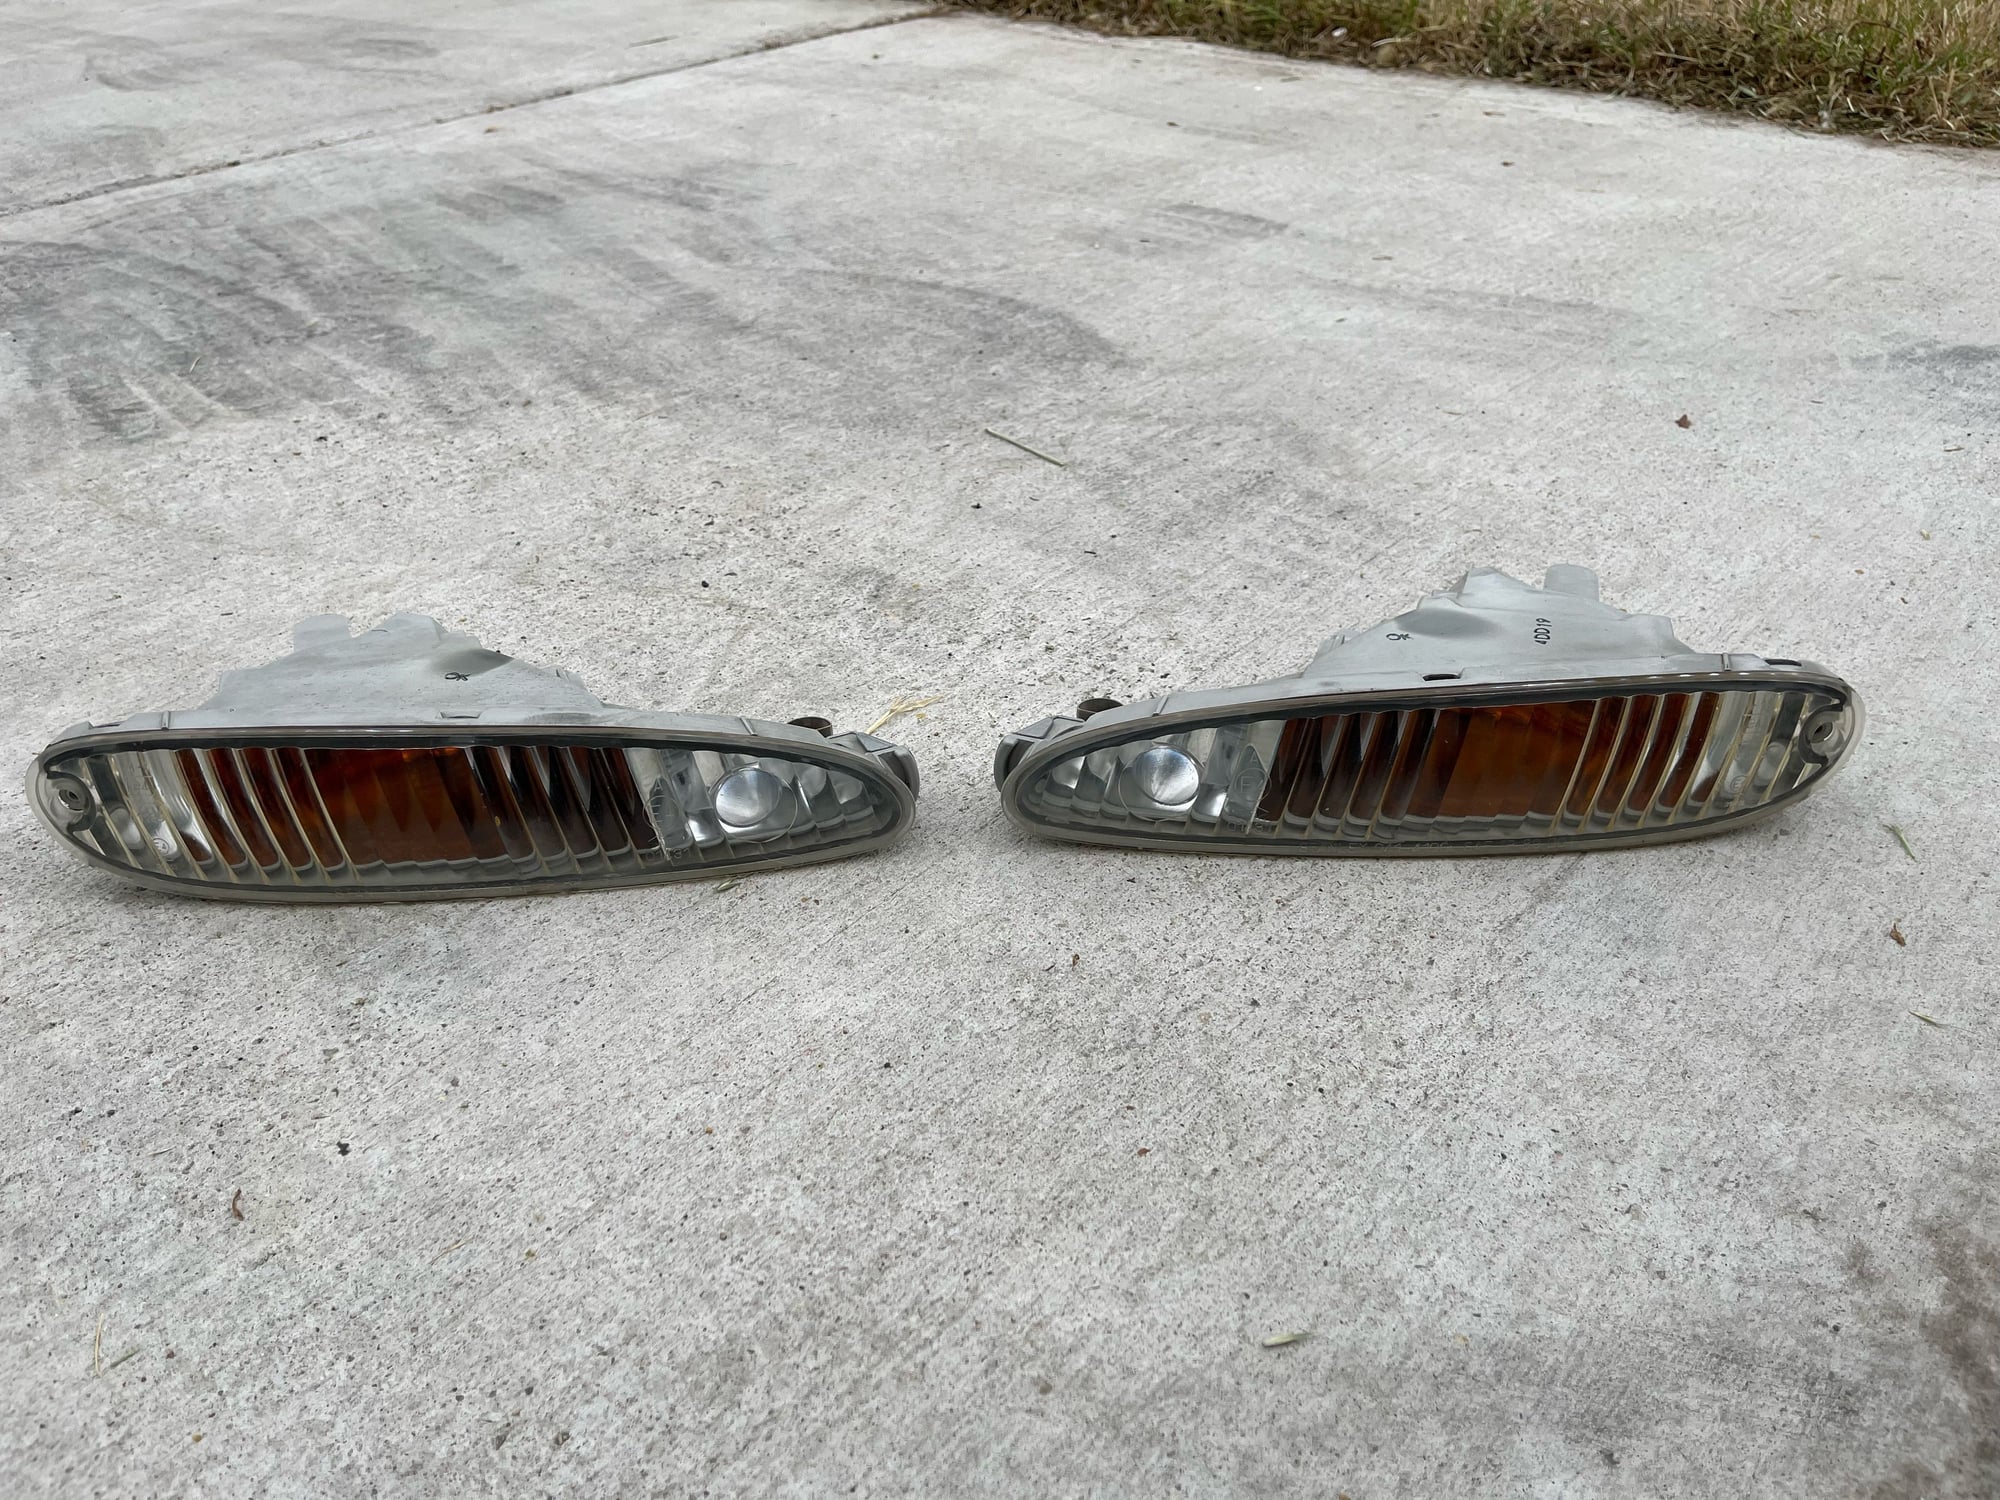 Lights - Front Signal Lights - $100 for the pair OBO - Used - 1993 to 1995 Mazda RX-7 - San Marcos, CA 92069, United States